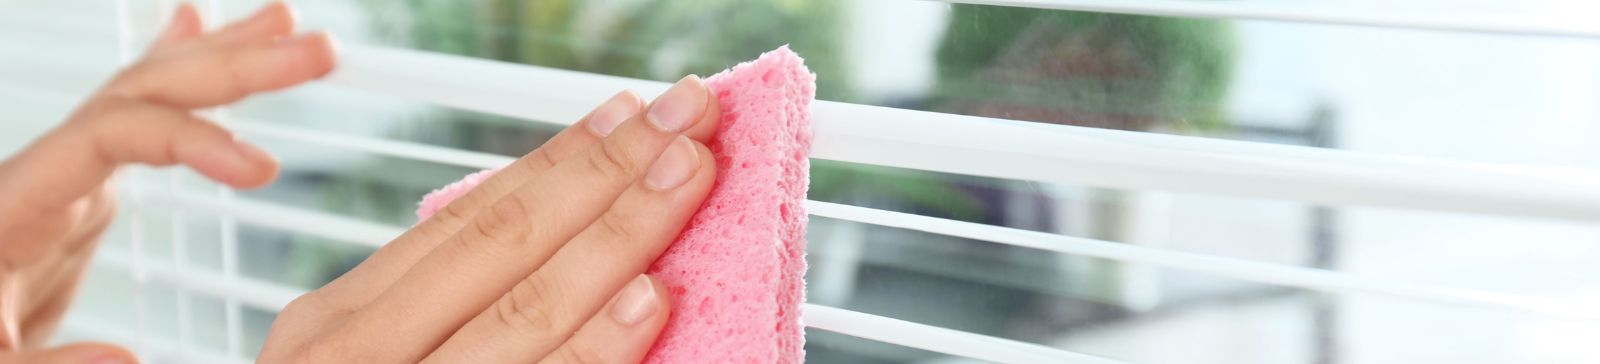 How to Clean and Maintain Window Blinds and Shutters for Lasting Elegance